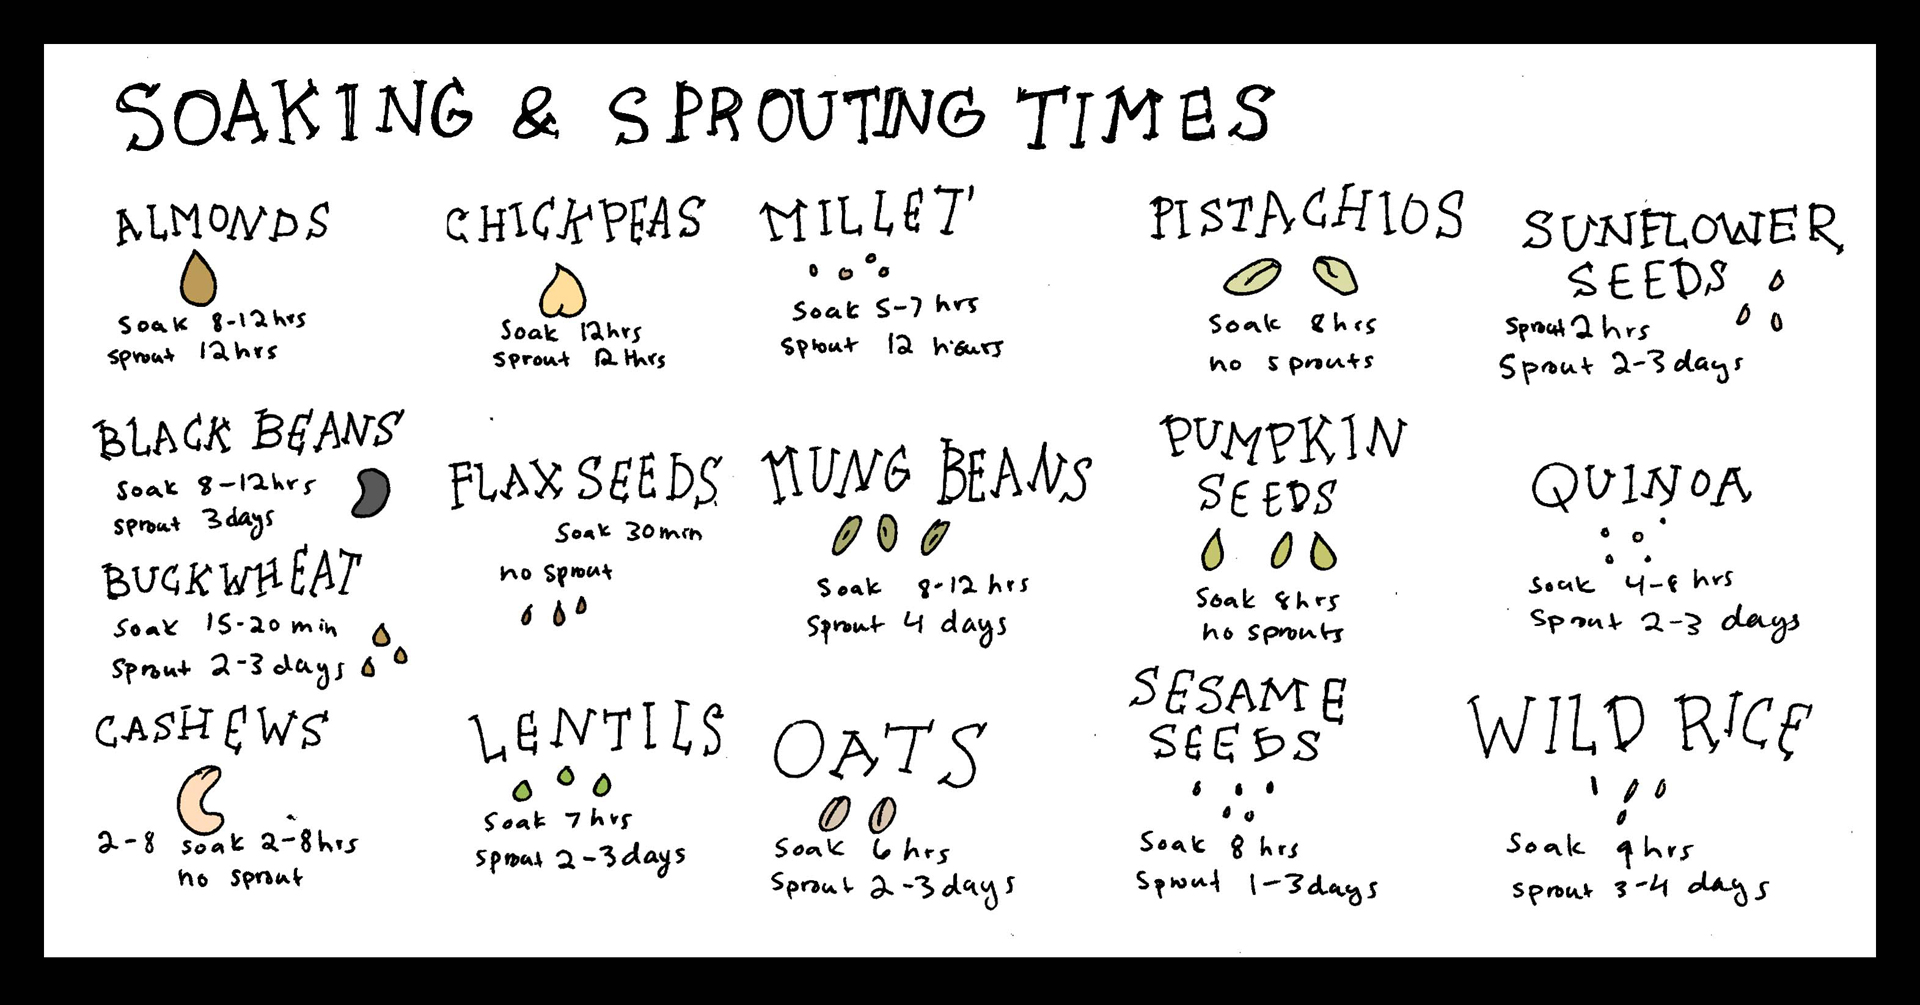 Soaking & Sprouting Times